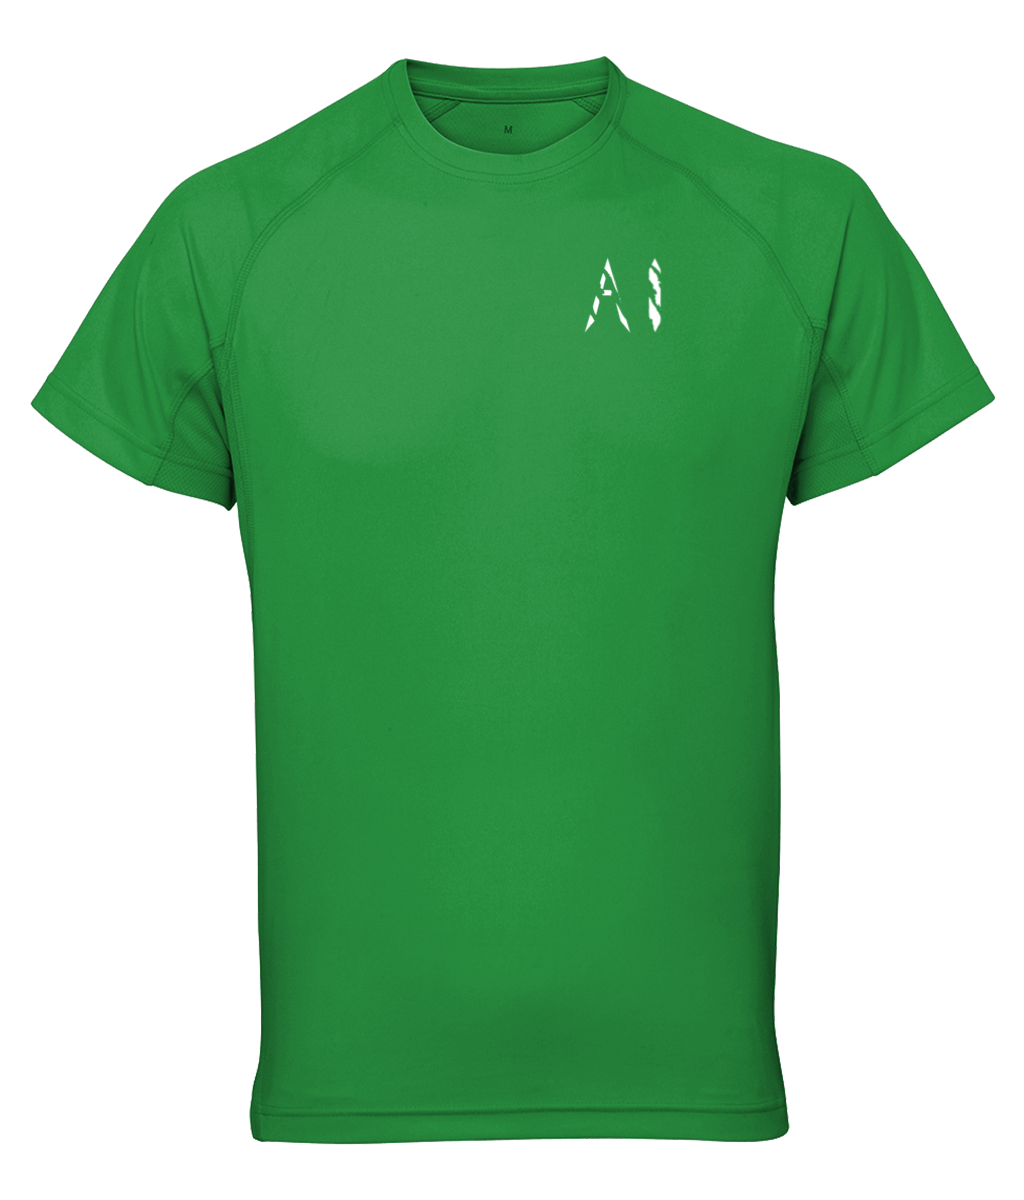 Womens green Athletic Performance Top with White AI logo on left breast